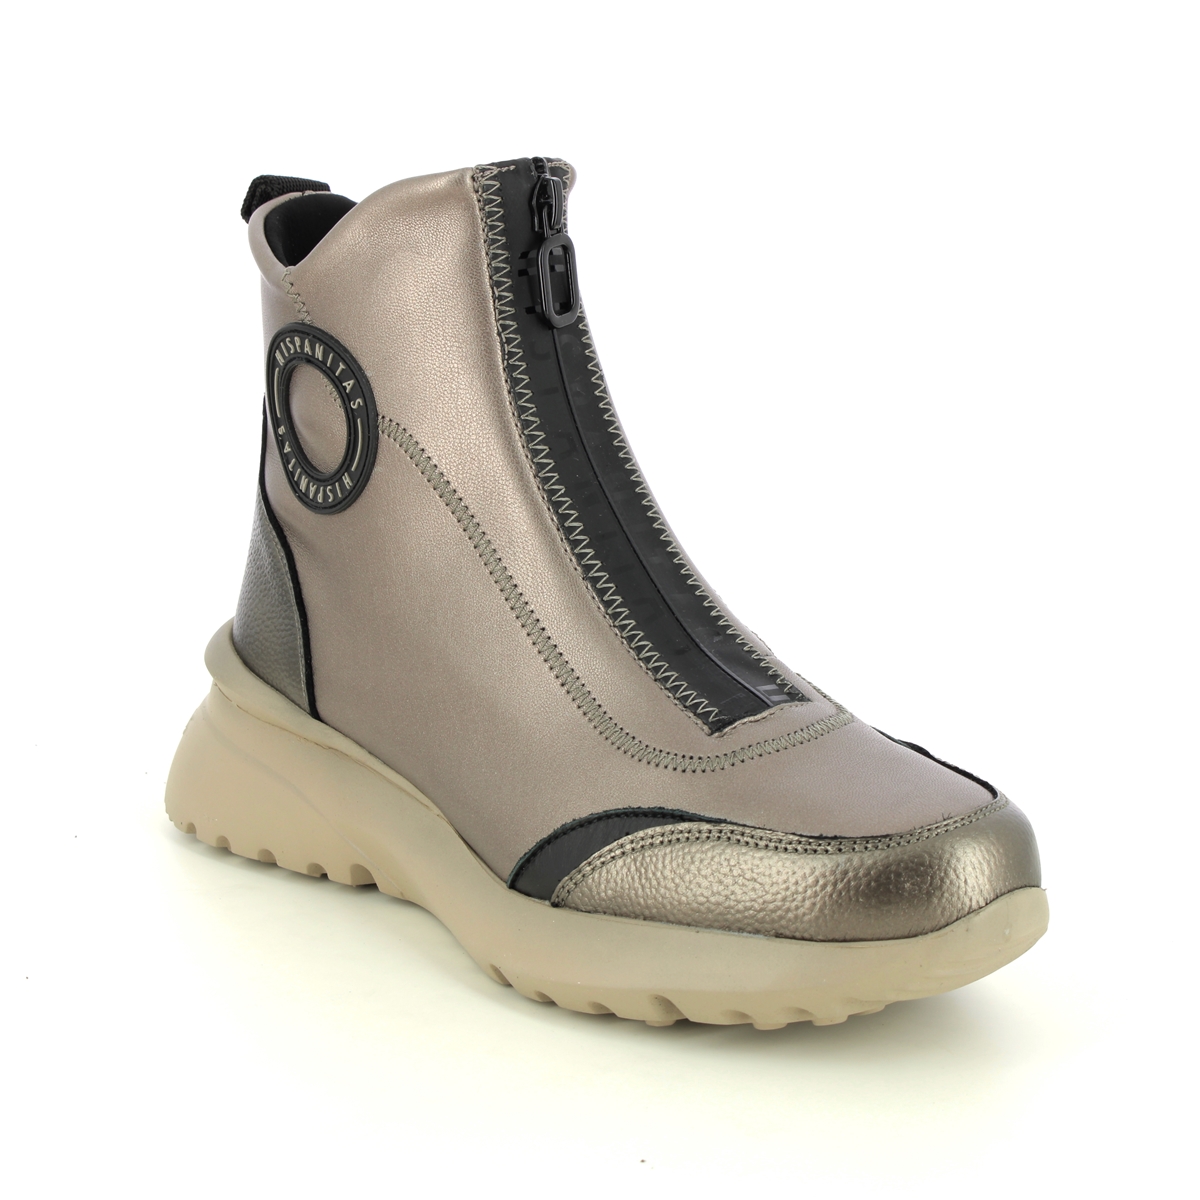 Hispanitas Polinesia Boot Pewter Womens Hi Tops CHI233016-51 in a Plain Man-made in Size 40